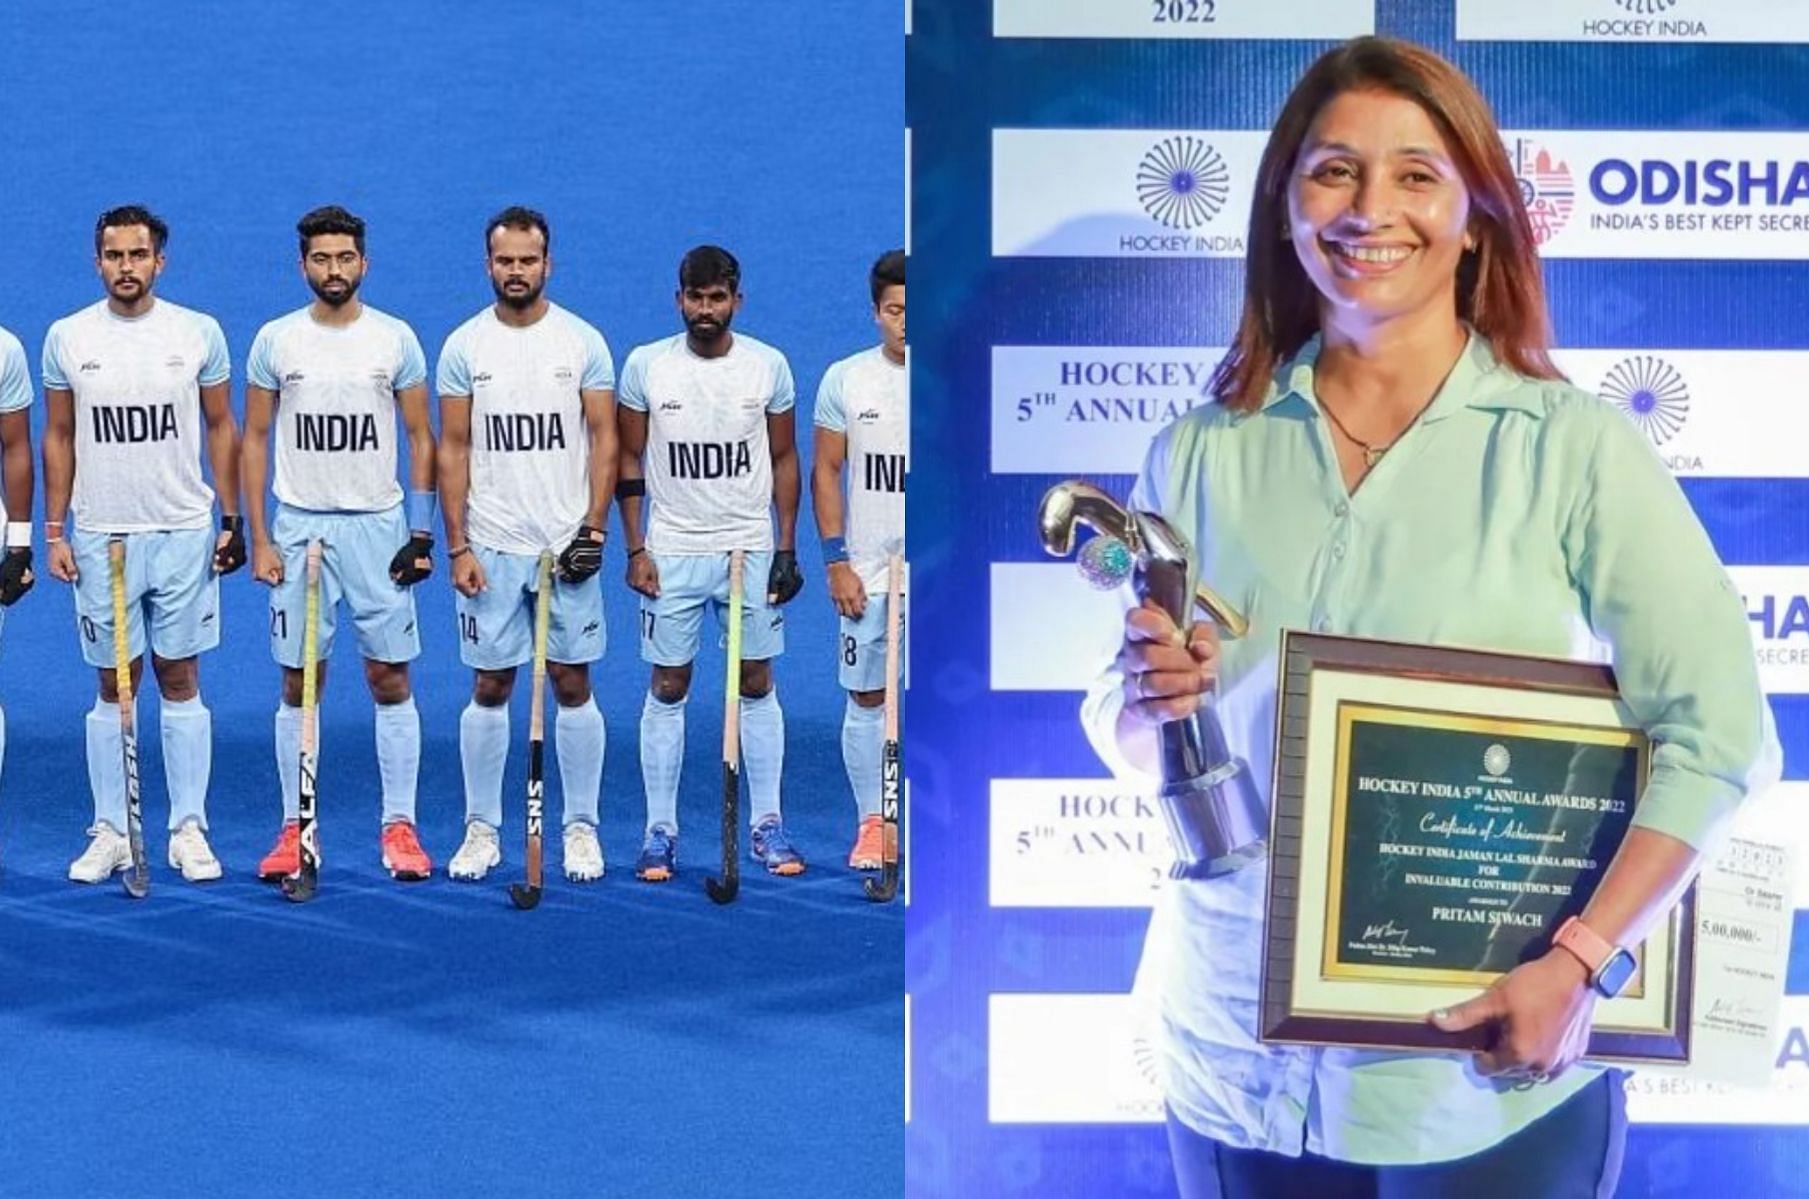 Pritam Rani. (Credit: Getty Images and Hockey India)